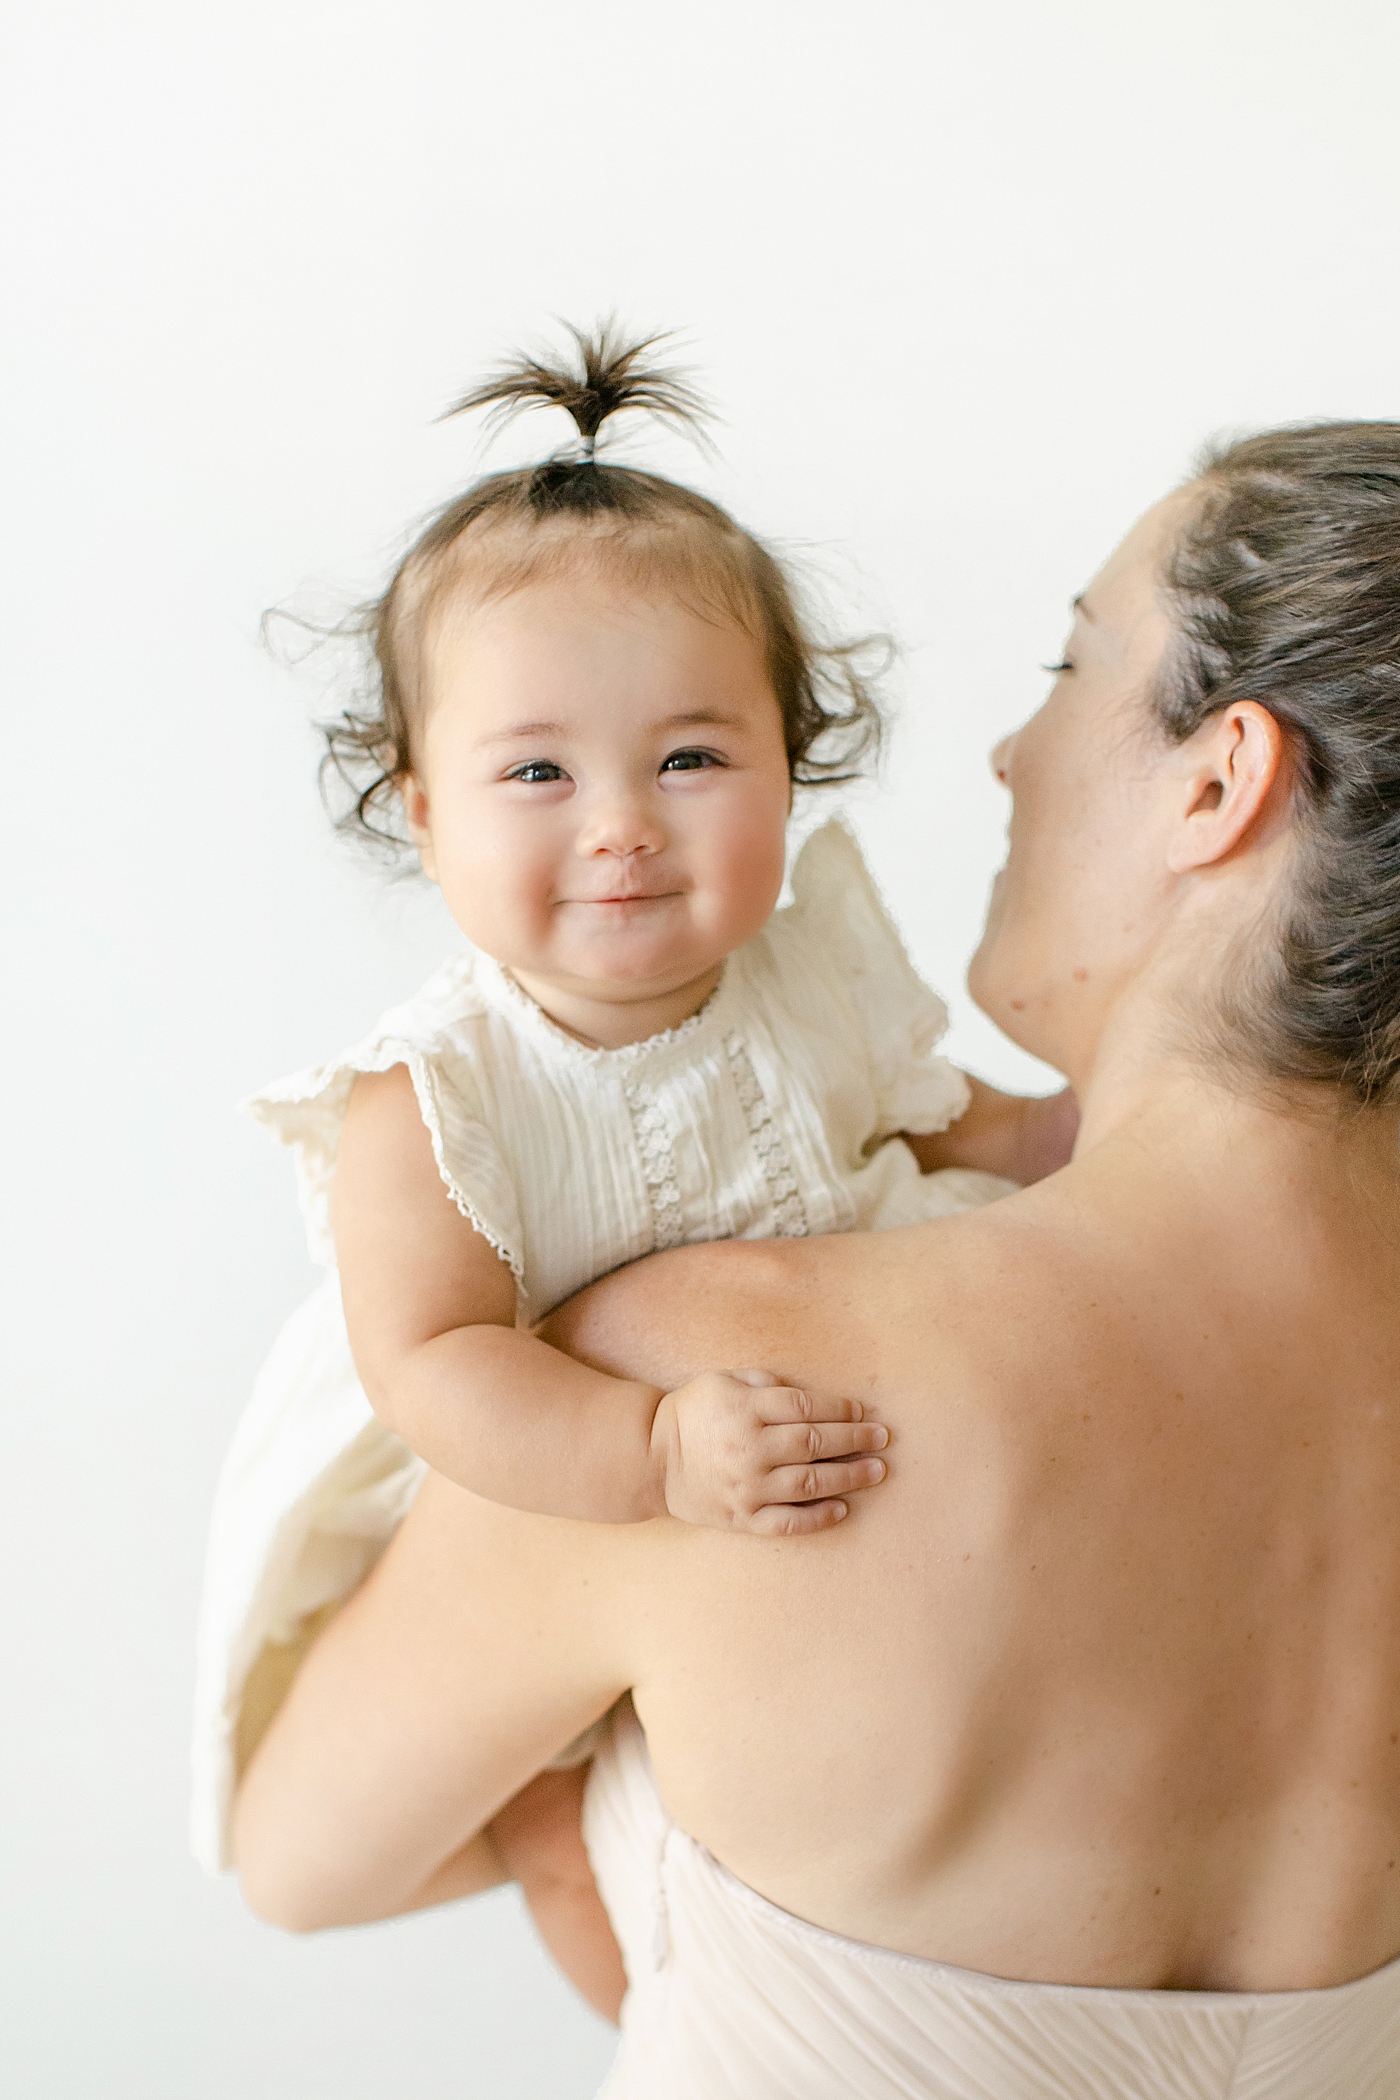 Baby girl held by mom smiling | Image by Chrissy Winchester Photography